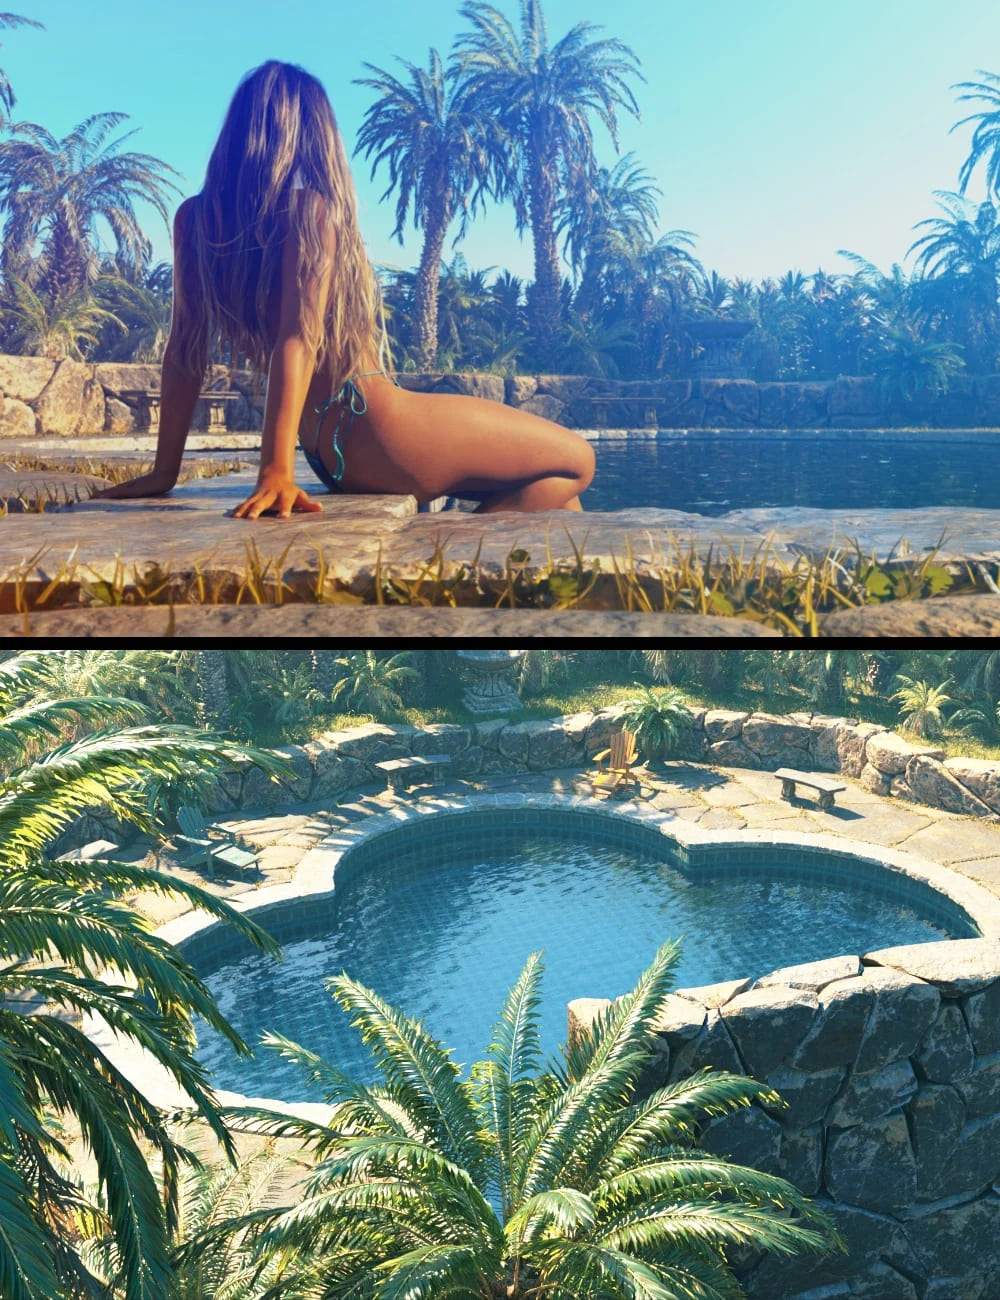 Natural Stone Poolside and Scenes_DAZ3D下载站